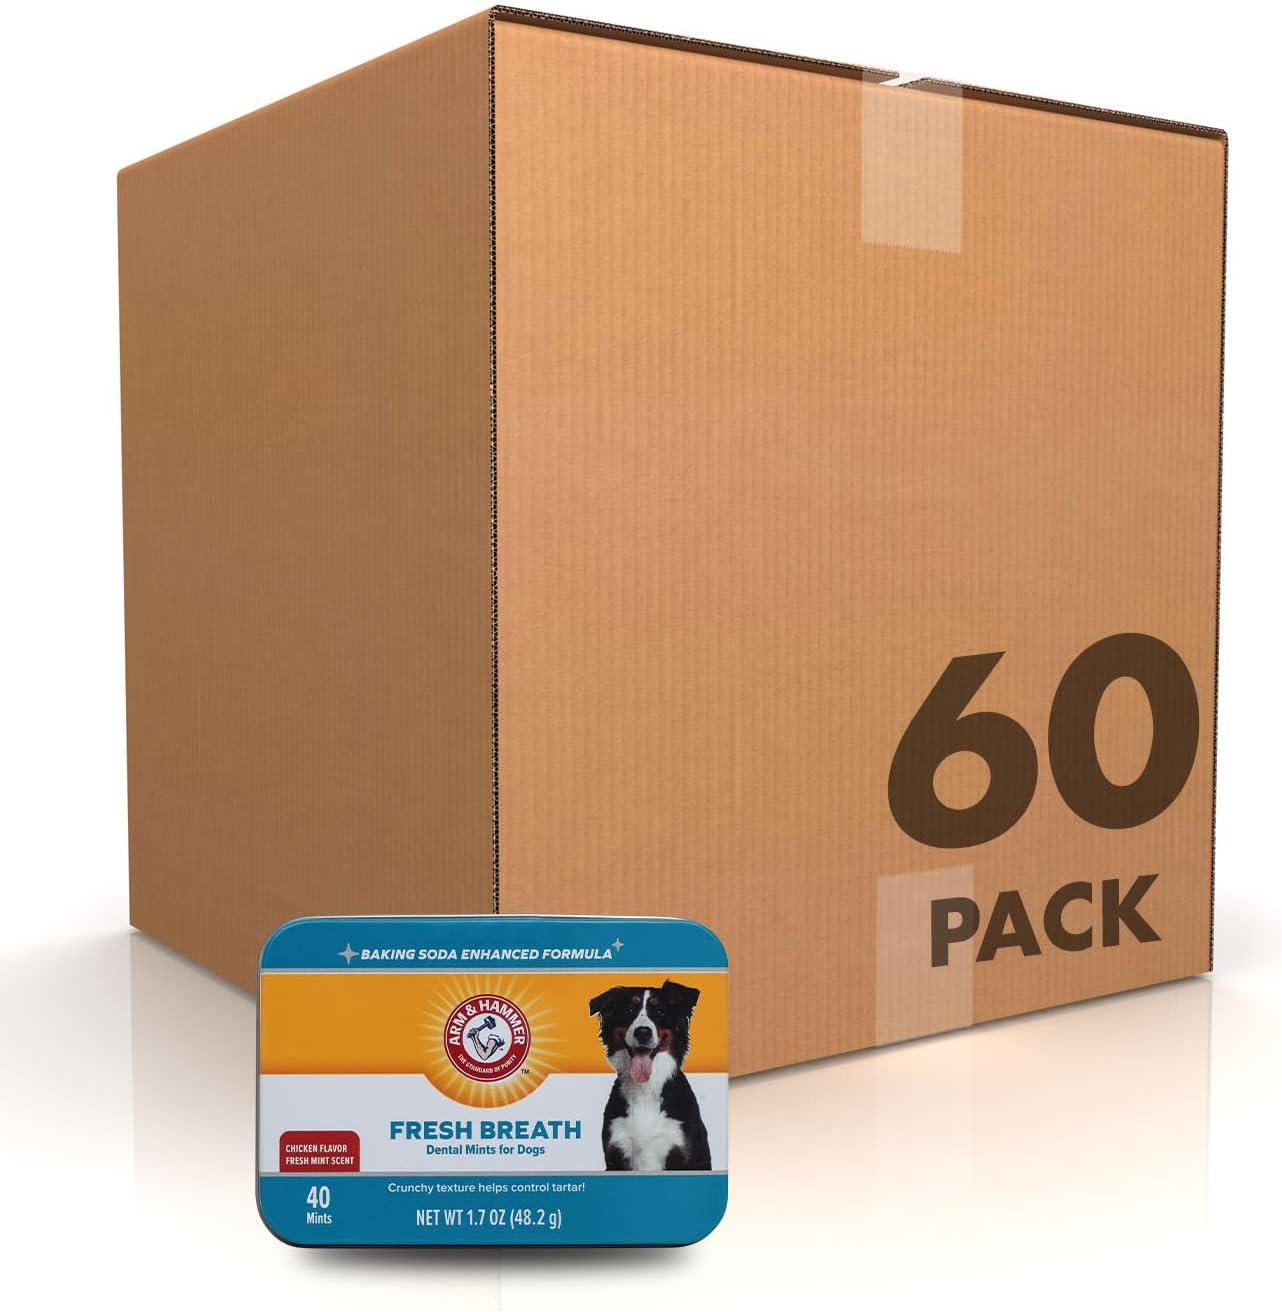 Arm & Hammer for Pets Dental Mints for Dogs, Fresh Breath | Get Fresh Doggie Breath Without Brushing, Way to Fresher Dog Breath | Chicken Flavor, 40 Count - 60 Pack